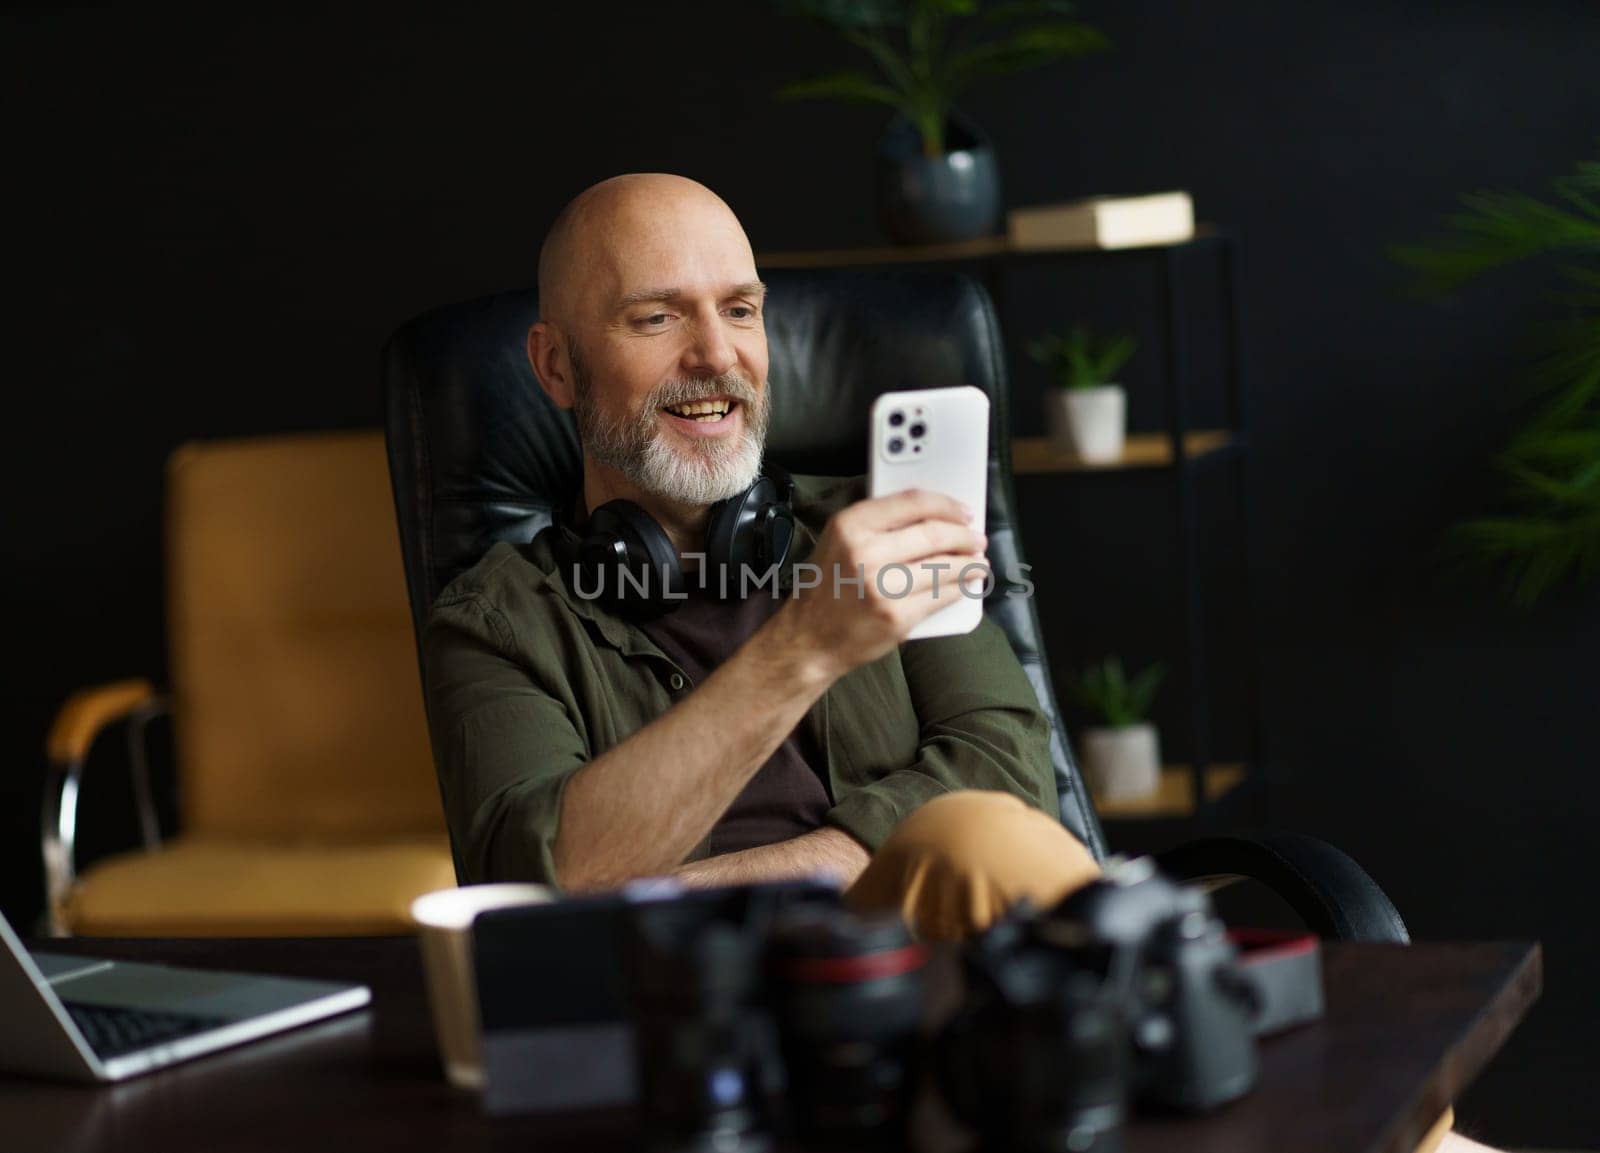 Mid aged man with bald head and silver beard engrossed in reading news on mobile phone. With laptop placed on desk in background, image captures essence of connected and digitally-oriented lifestyle. . High quality photo